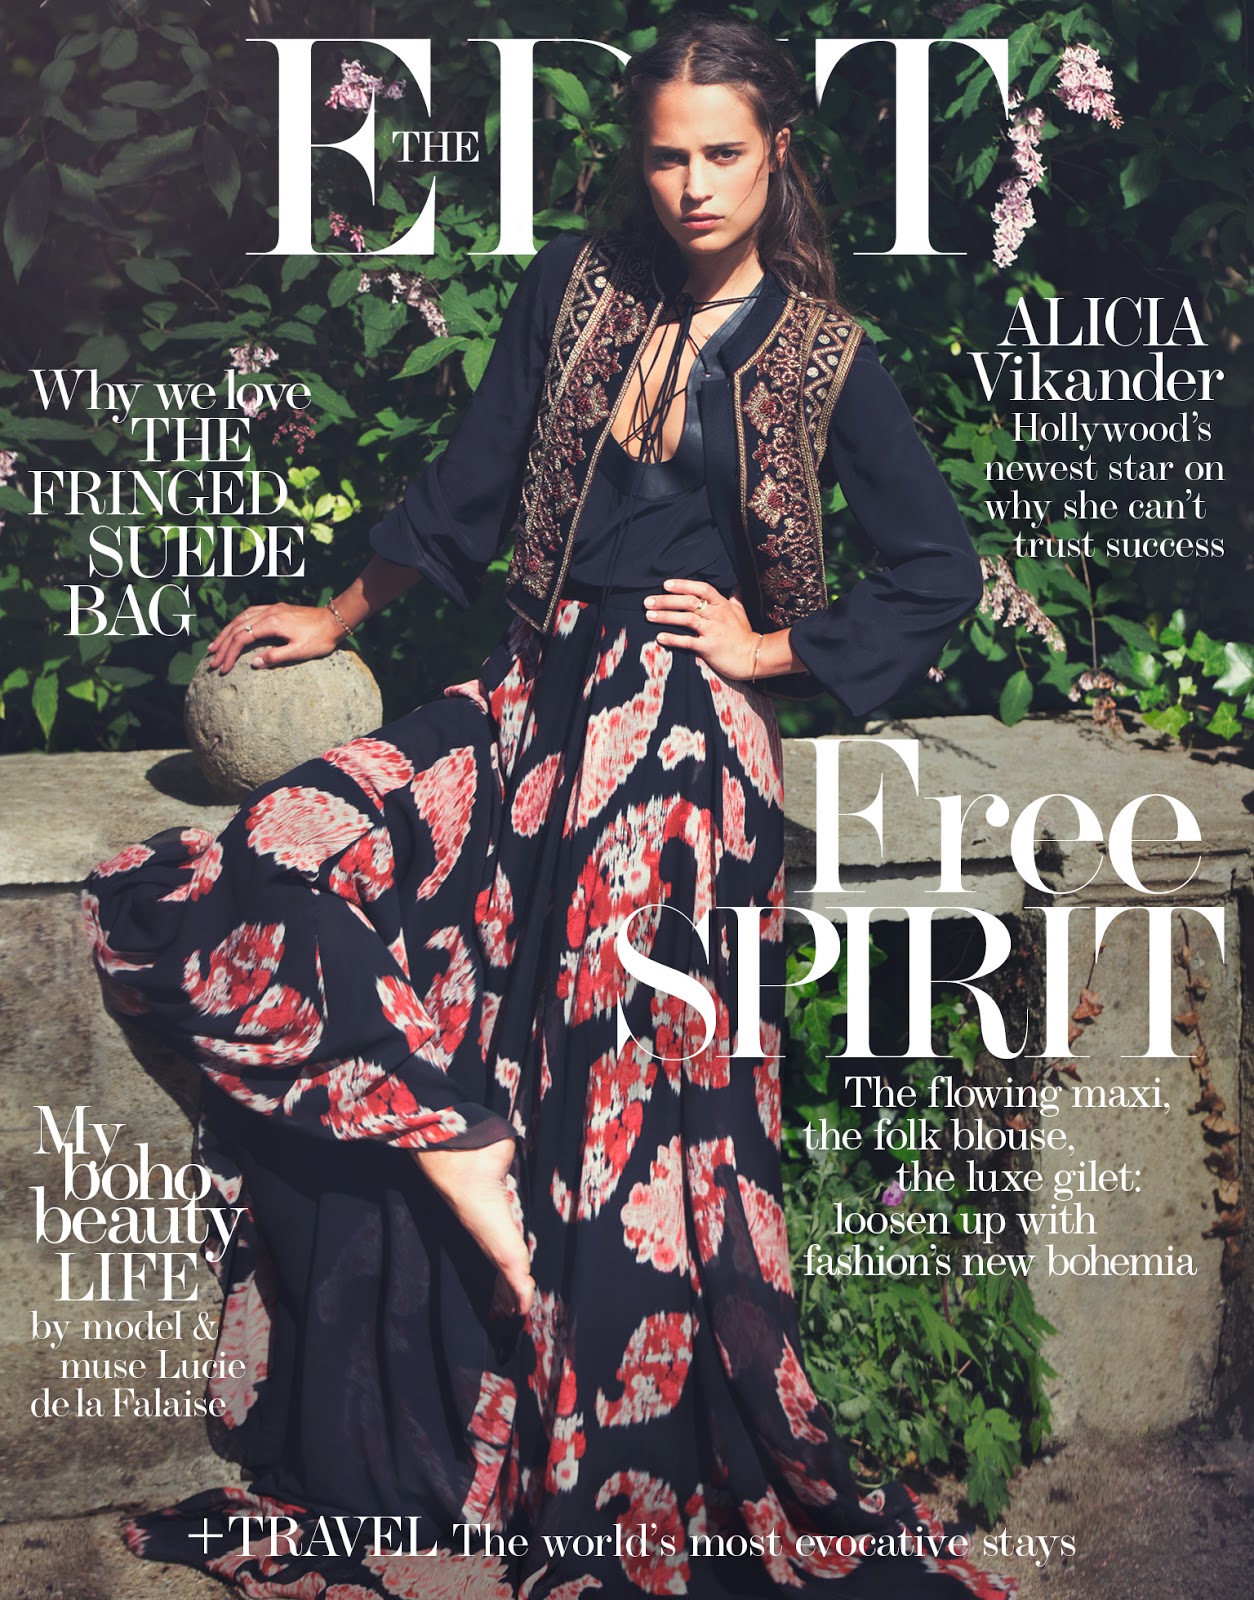 Alicia Vikander in The Edit Magazine July 30th, 2015 by David Bellemere